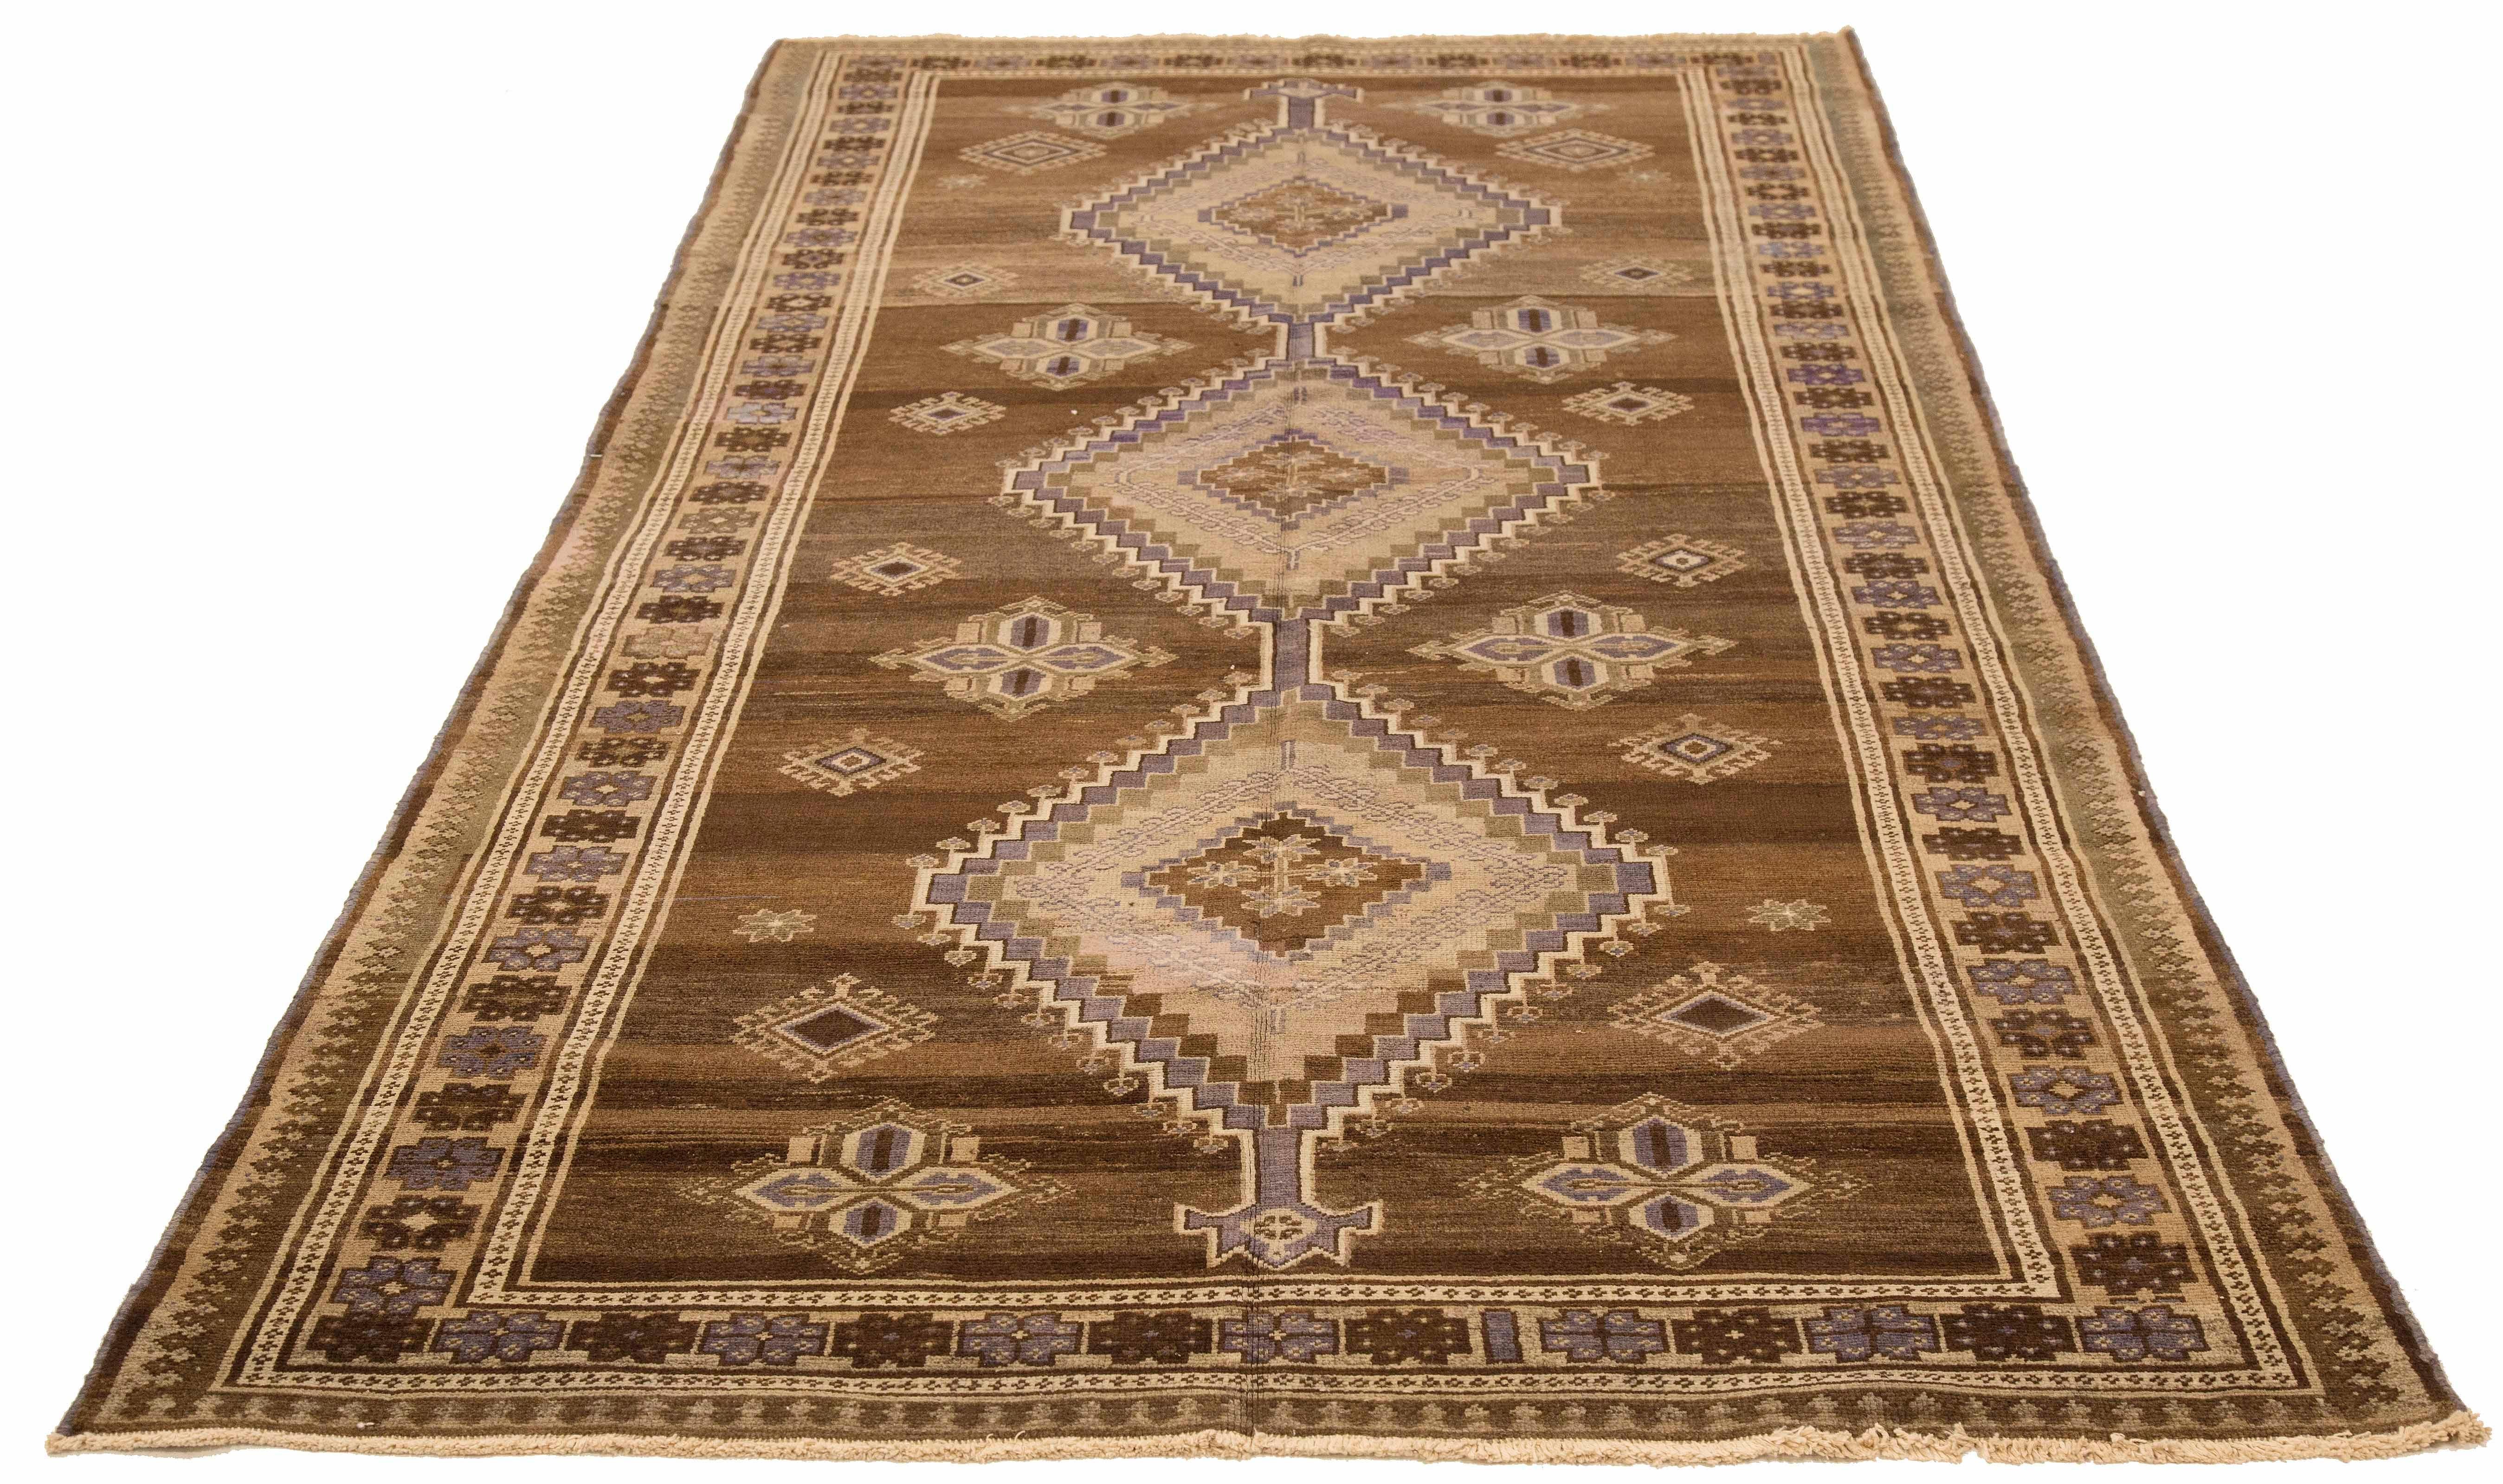 Antique Persian runner rug handwoven from the finest sheep’s wool and colored with all-natural vegetable dyes that are safe for humans and pets. It’s a traditional Malayer design featuring brown and gray geometric details. It’s a lovely piece to